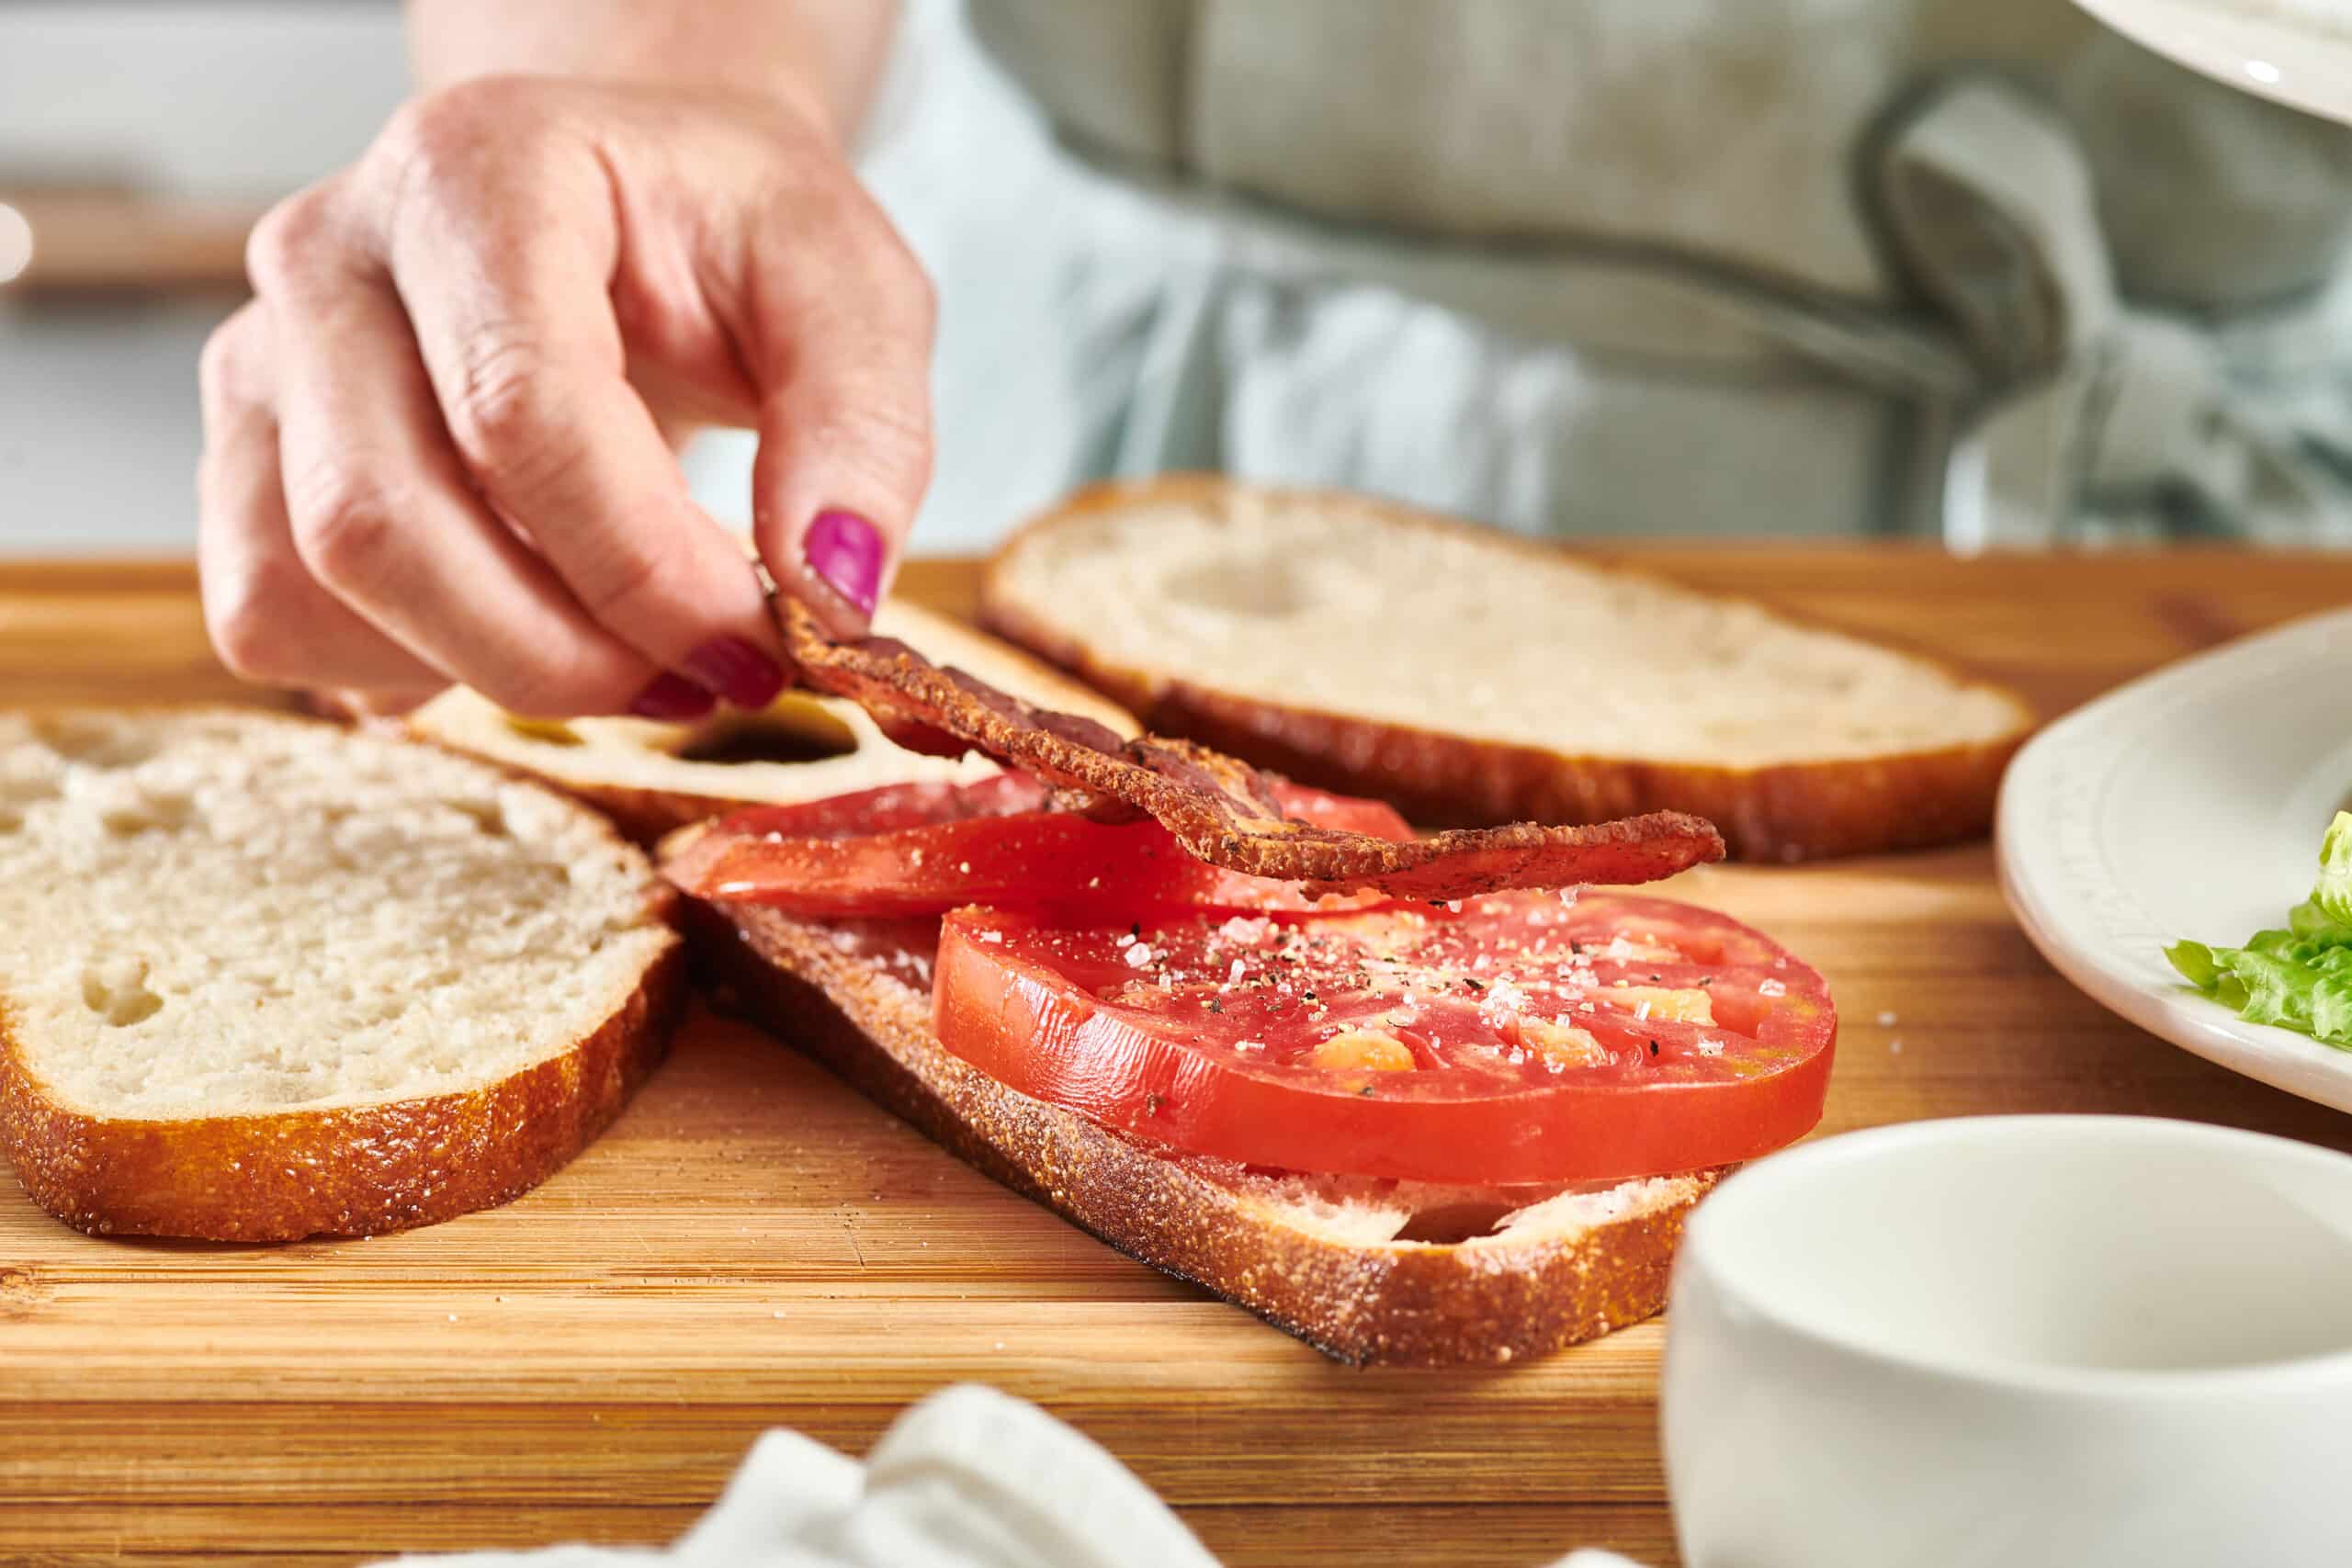 A woman's hand placing a slice of bacon on a slice of tomato resting on a slice of bread on a wooden cutting board.  